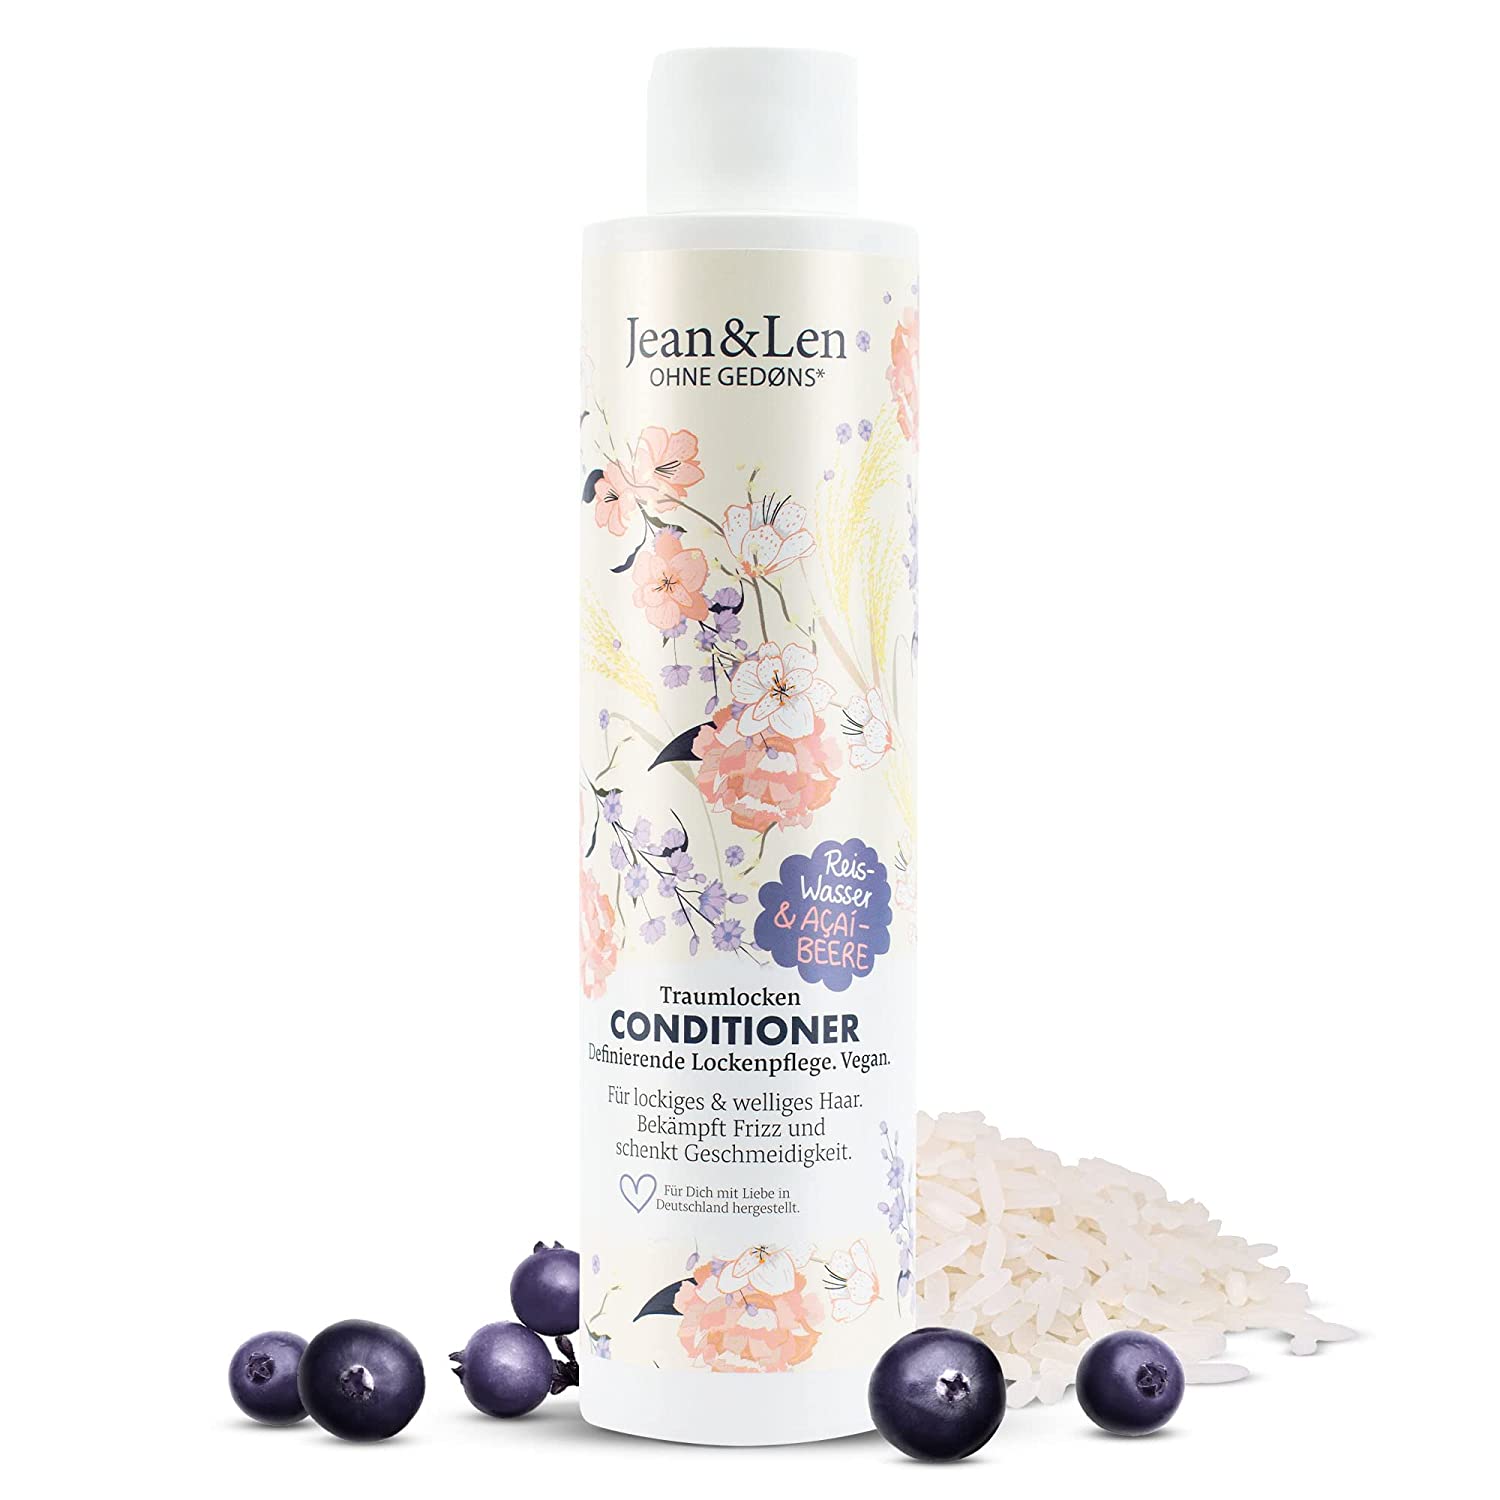 Jean & len Dreamlocke Conditioner Rice Water & Açai Berry for Curly & Wavy Hair, Fights Frizz and Gives Softness, Hair Conditioner, Paraben & Silicone, Vegan, 300 ml, ‎white